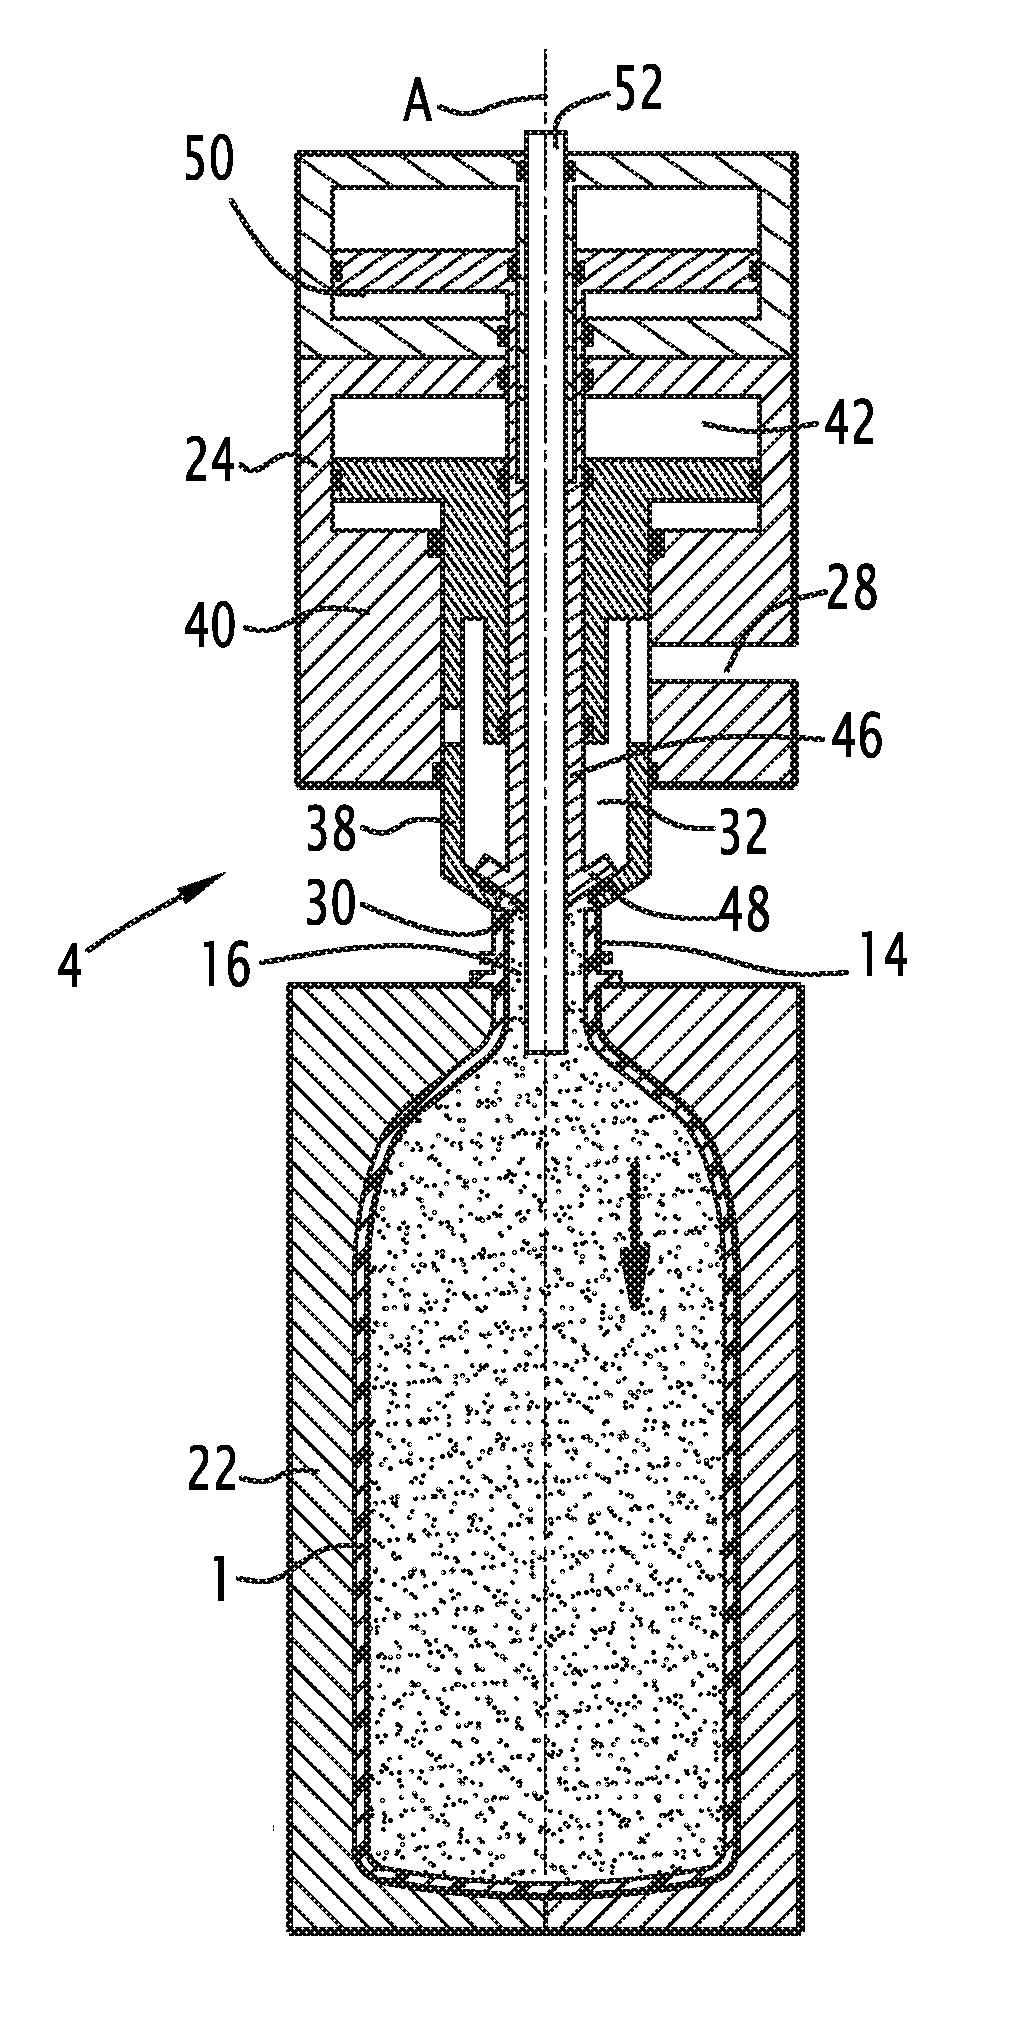 Method for forming and filling a container with an end product comprising a concentrated liquid